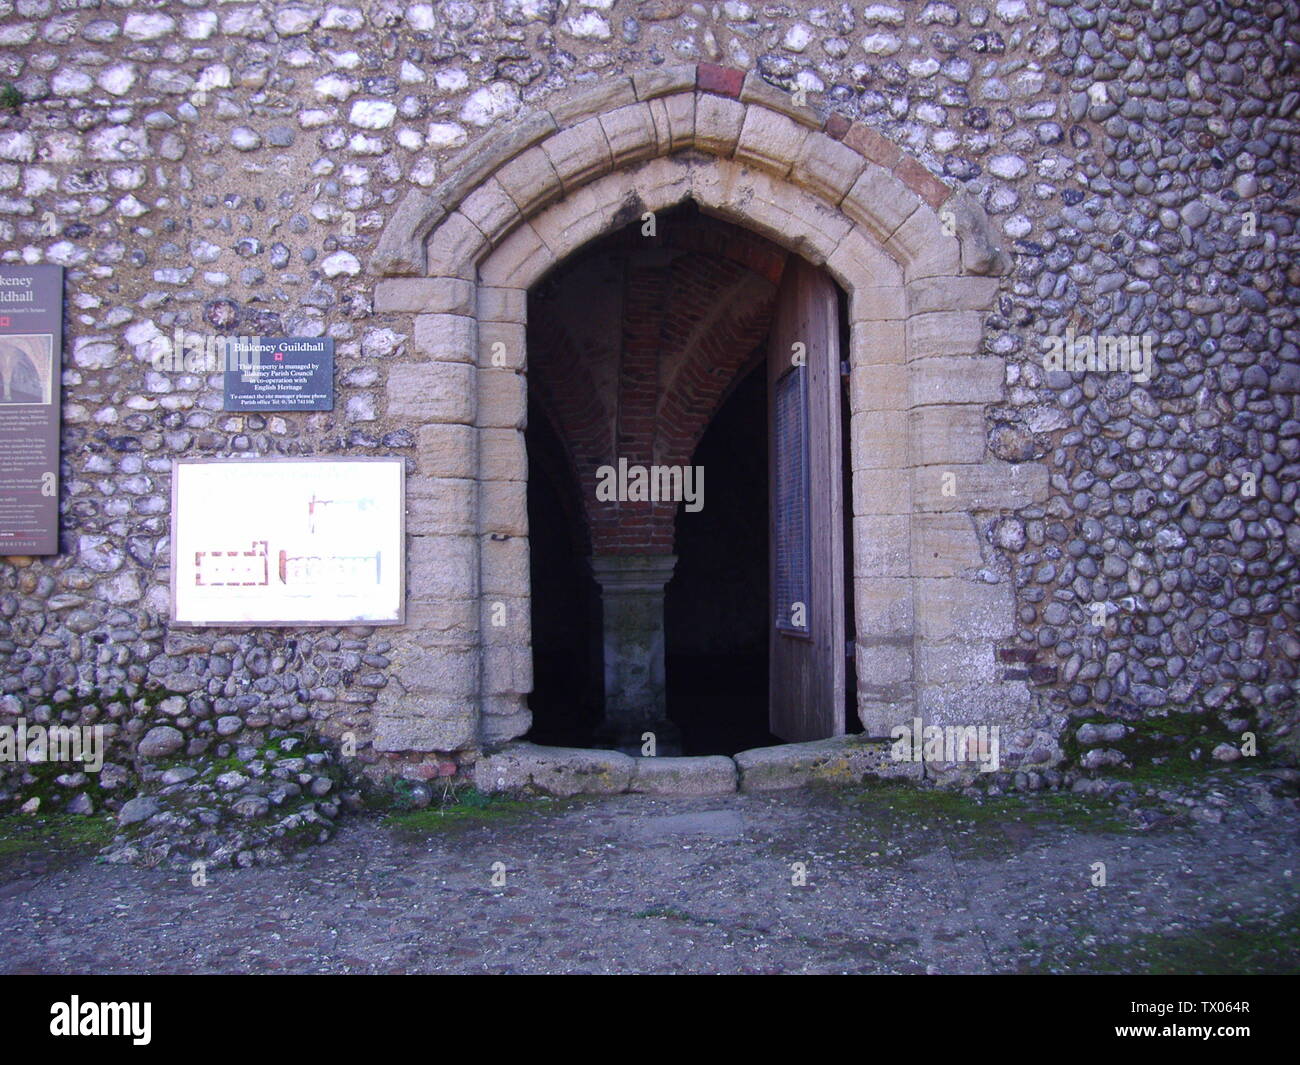 A Digitla Photograph Of the Entrance to Blakeney Guildhall Undercroft 13th October 2007; 13 October 2007 (original upload date); Transferred from en.pedia to Commons by Oxyman using CommonsHelper.; Stavros1 at English pedia; Stock Photo